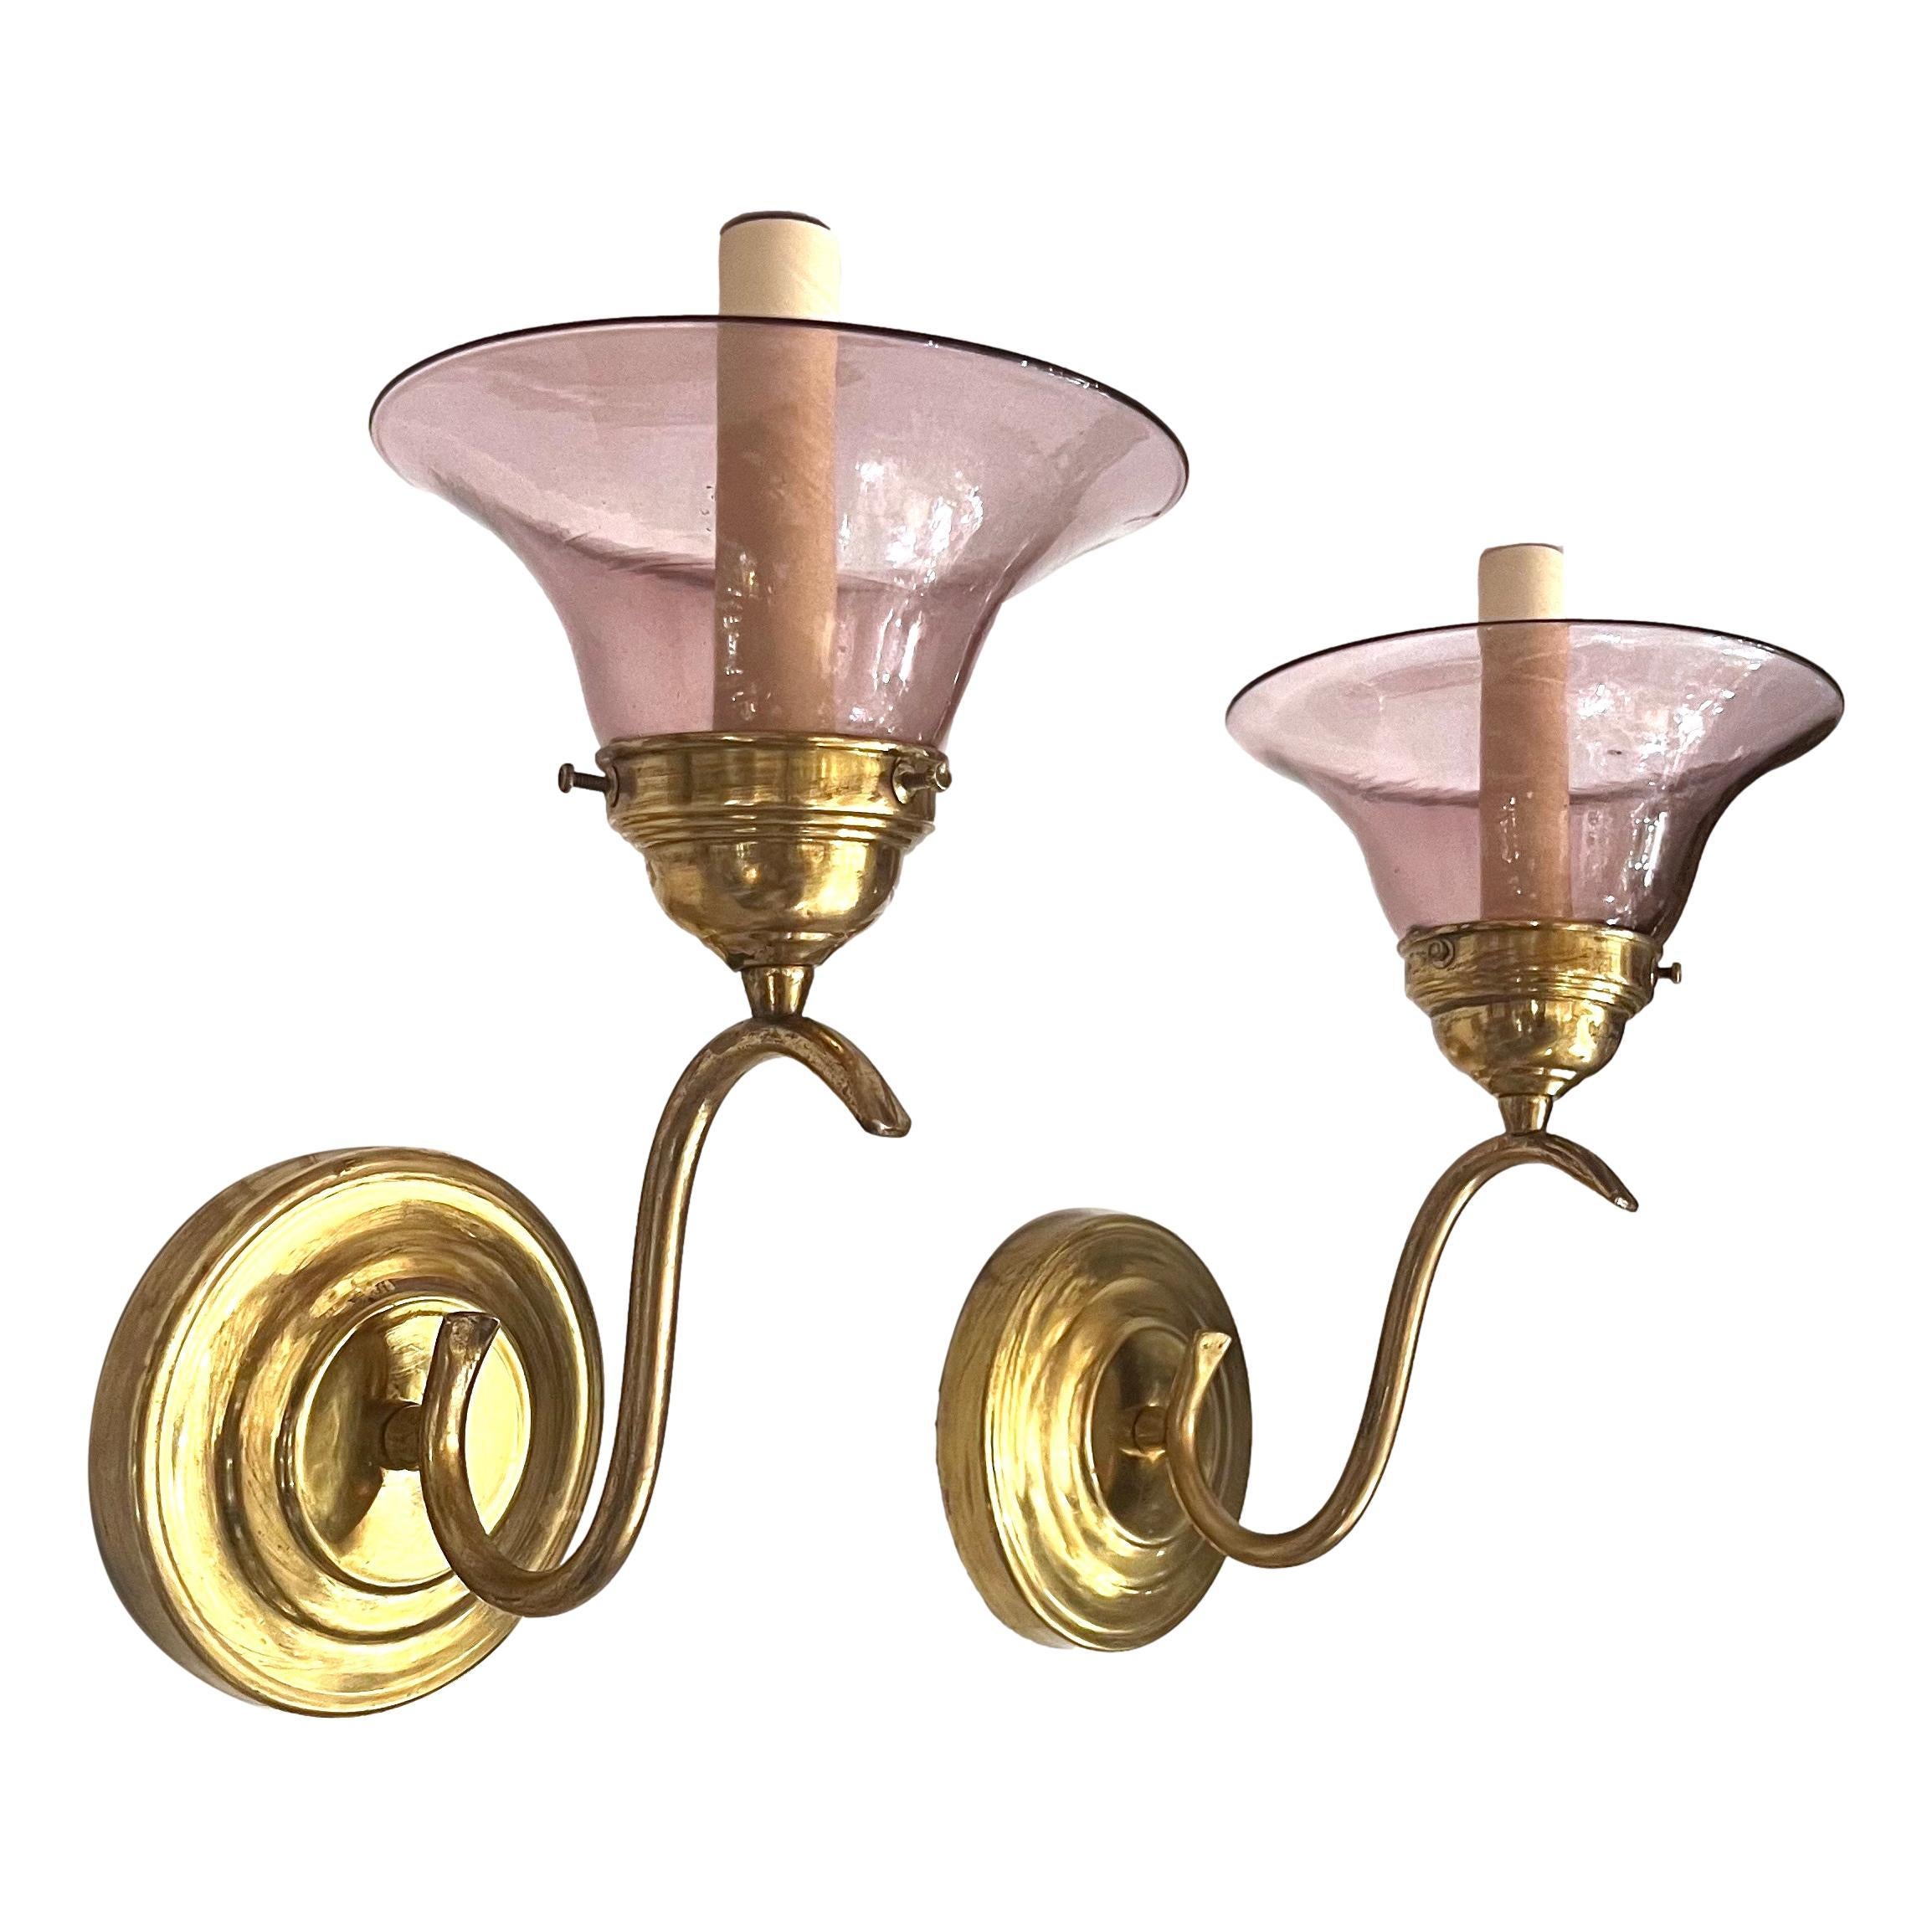 Pair of Italian circa 1920's single light sconces with amethyst glass shade.

Measurements:
Height: 11